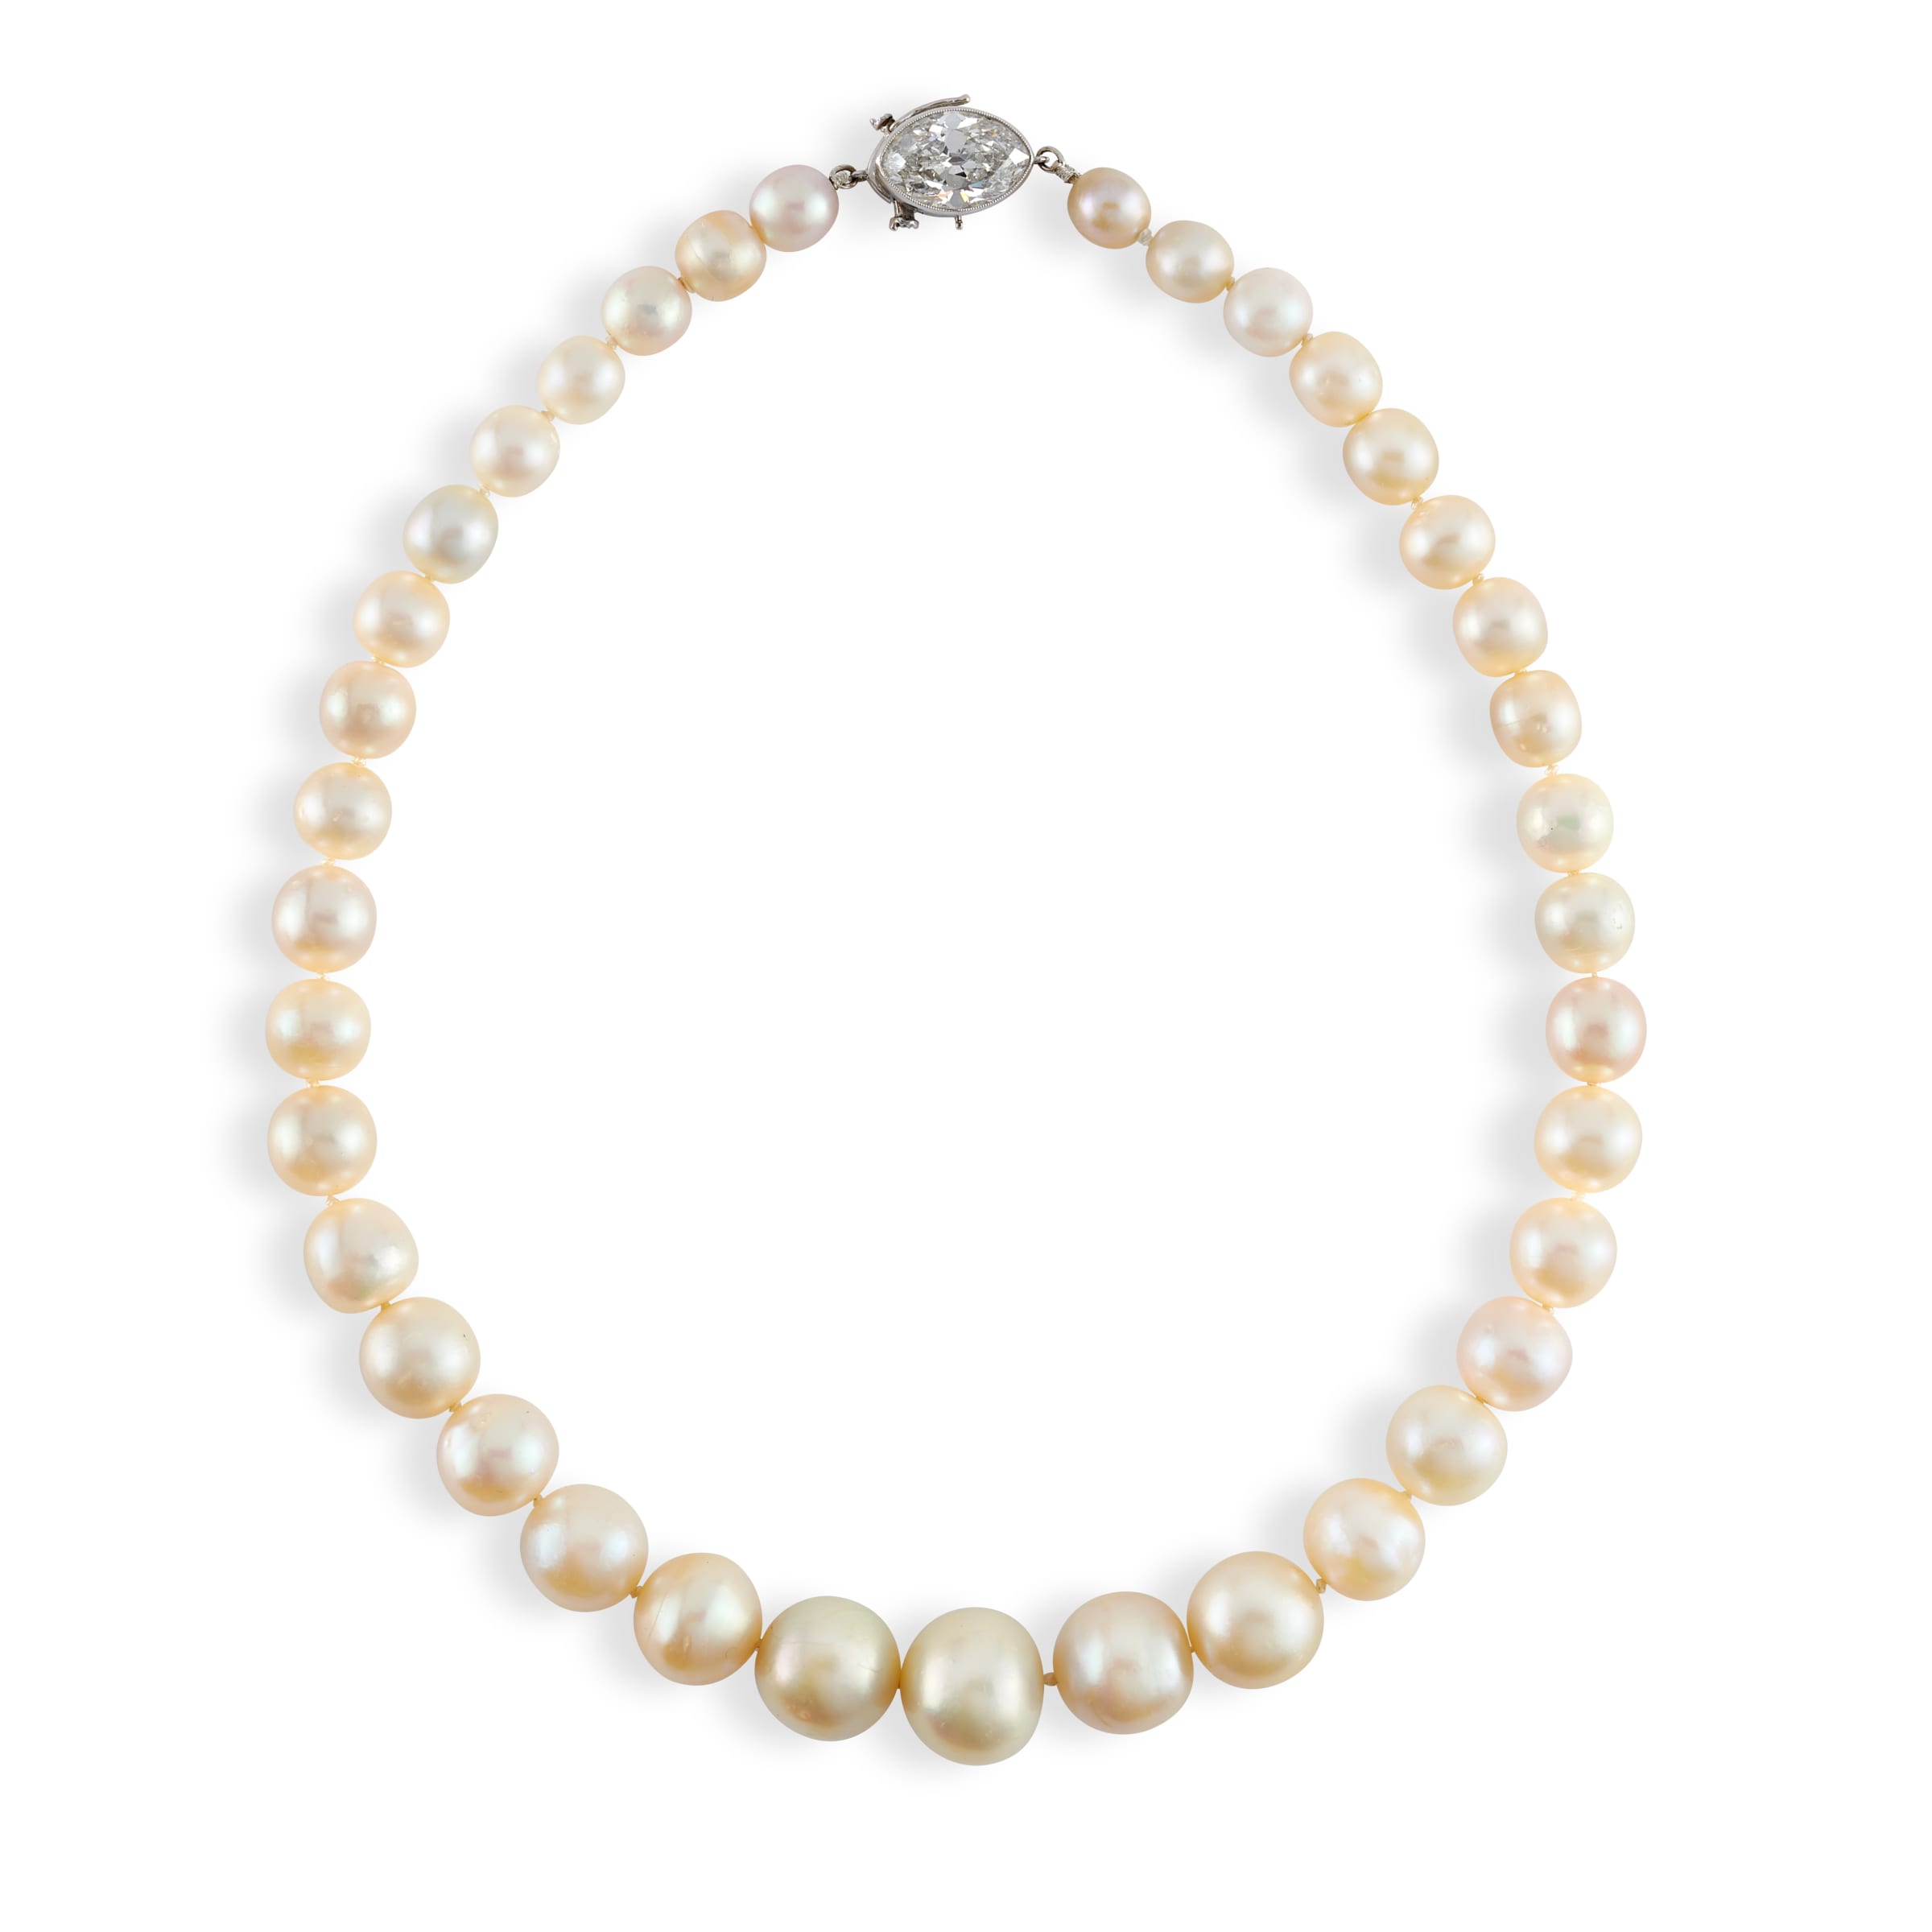 A Natural Pearl And Diamond Necklace Circa 1920 Symbolic And Chase